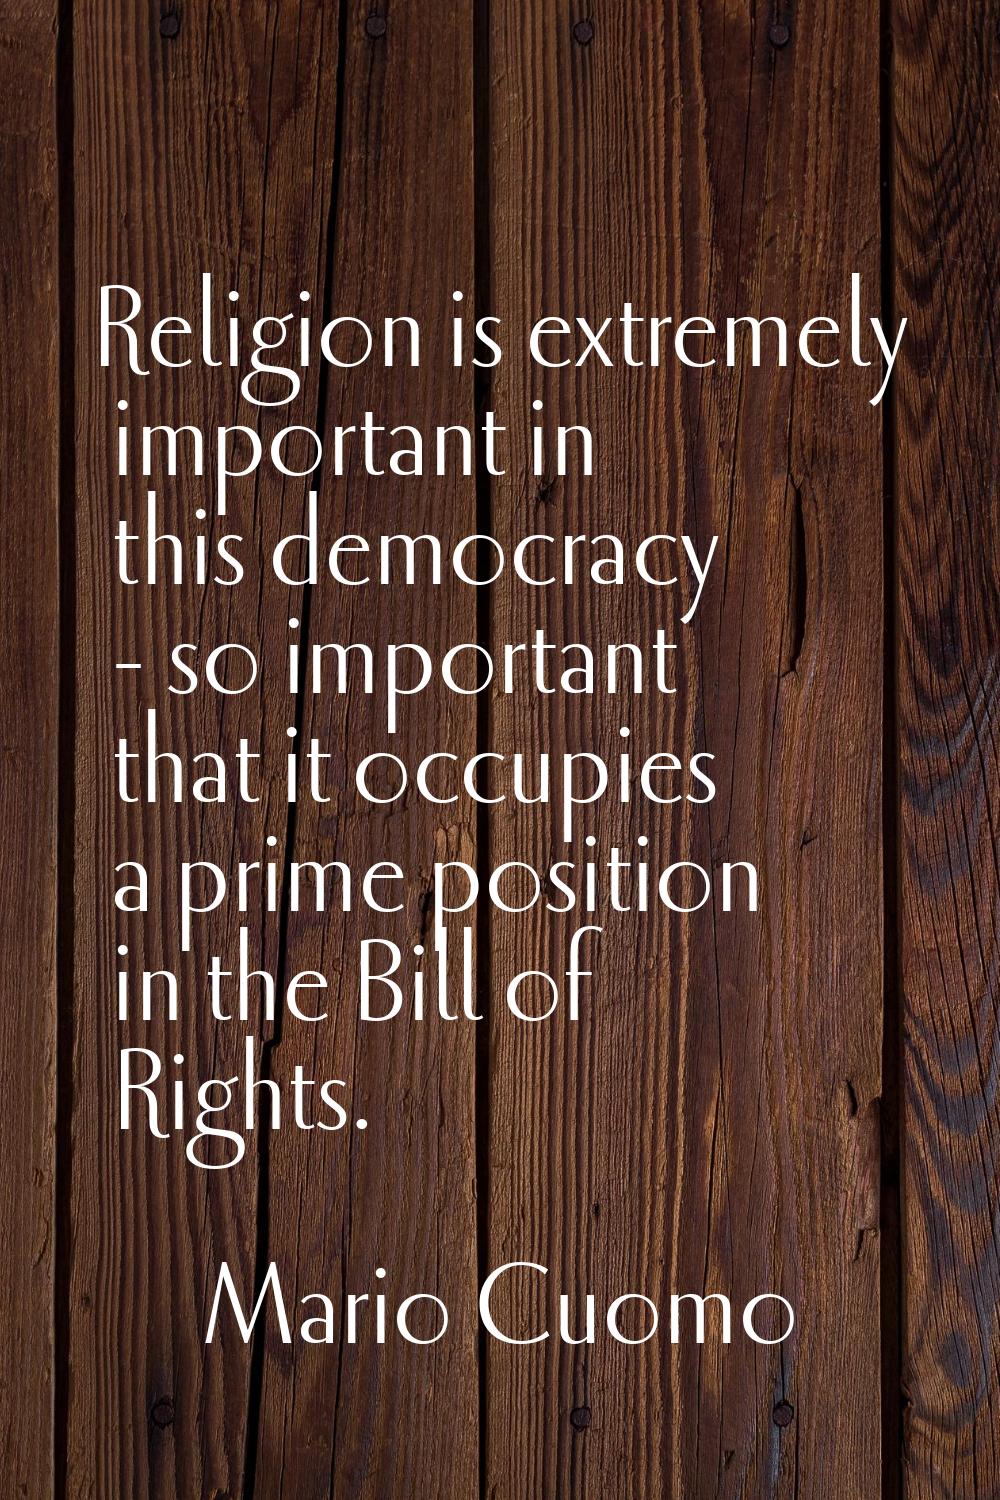 Religion is extremely important in this democracy - so important that it occupies a prime position 